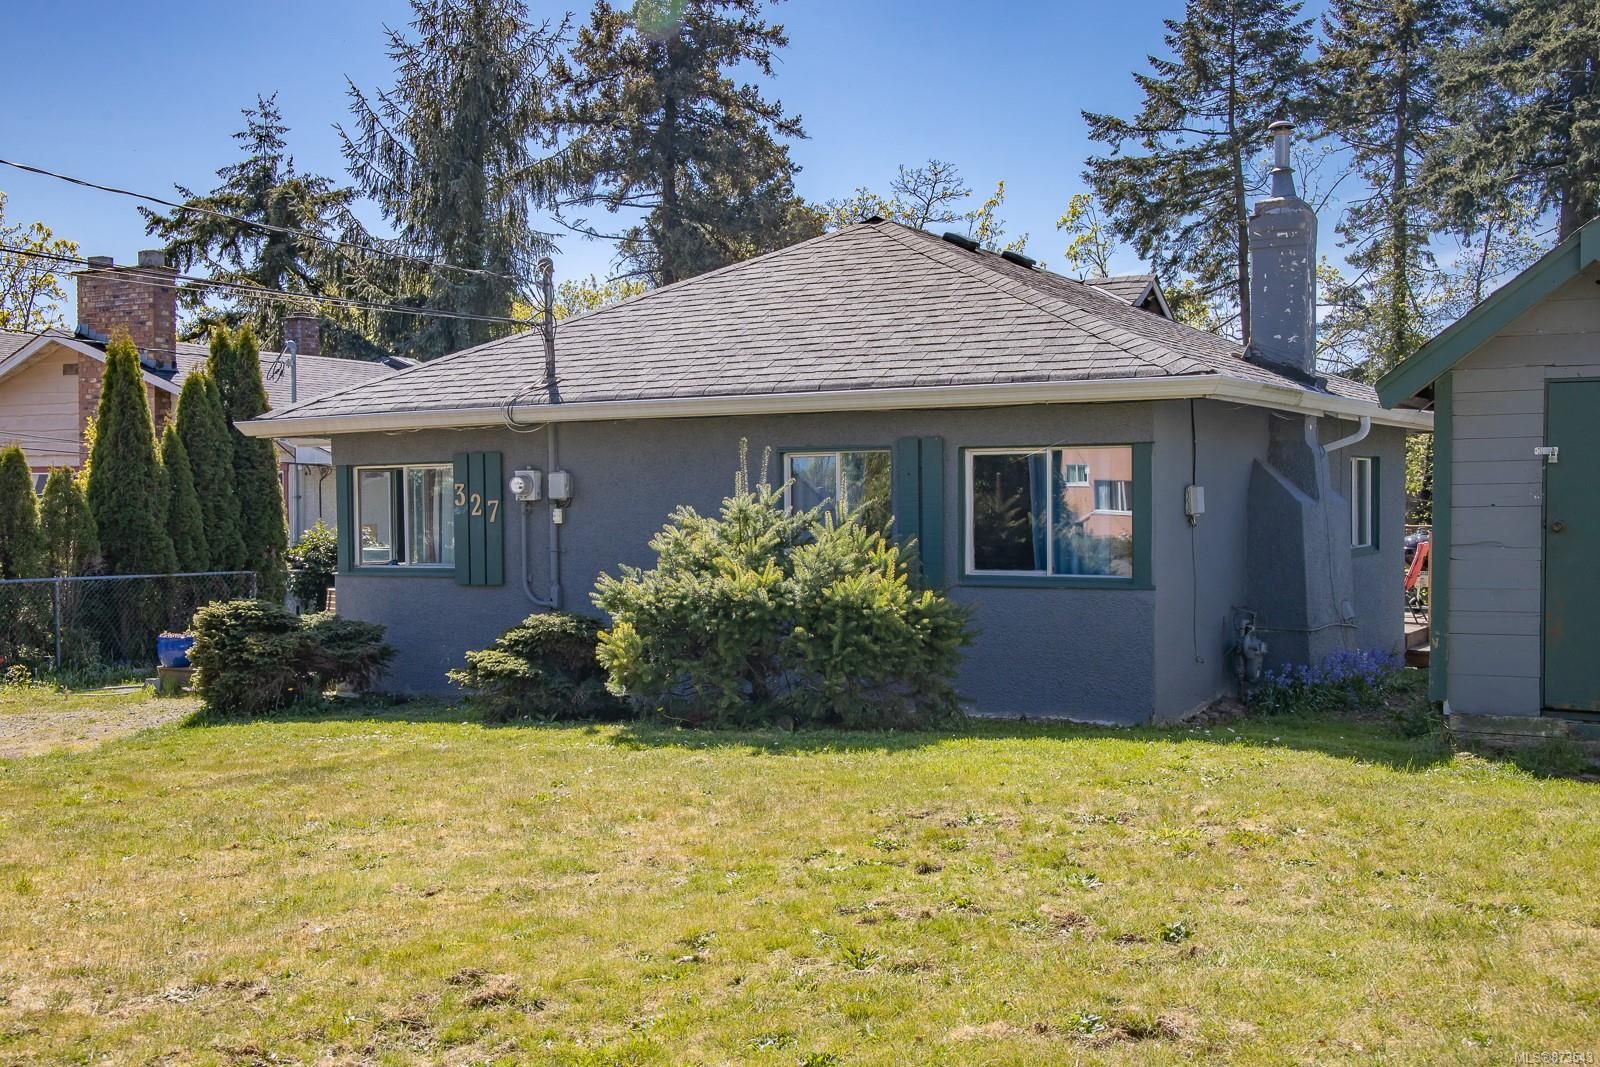 Photo 2: Photos: 327 St. George St in Nanaimo: Na Central Nanaimo House for sale : MLS®# 873543